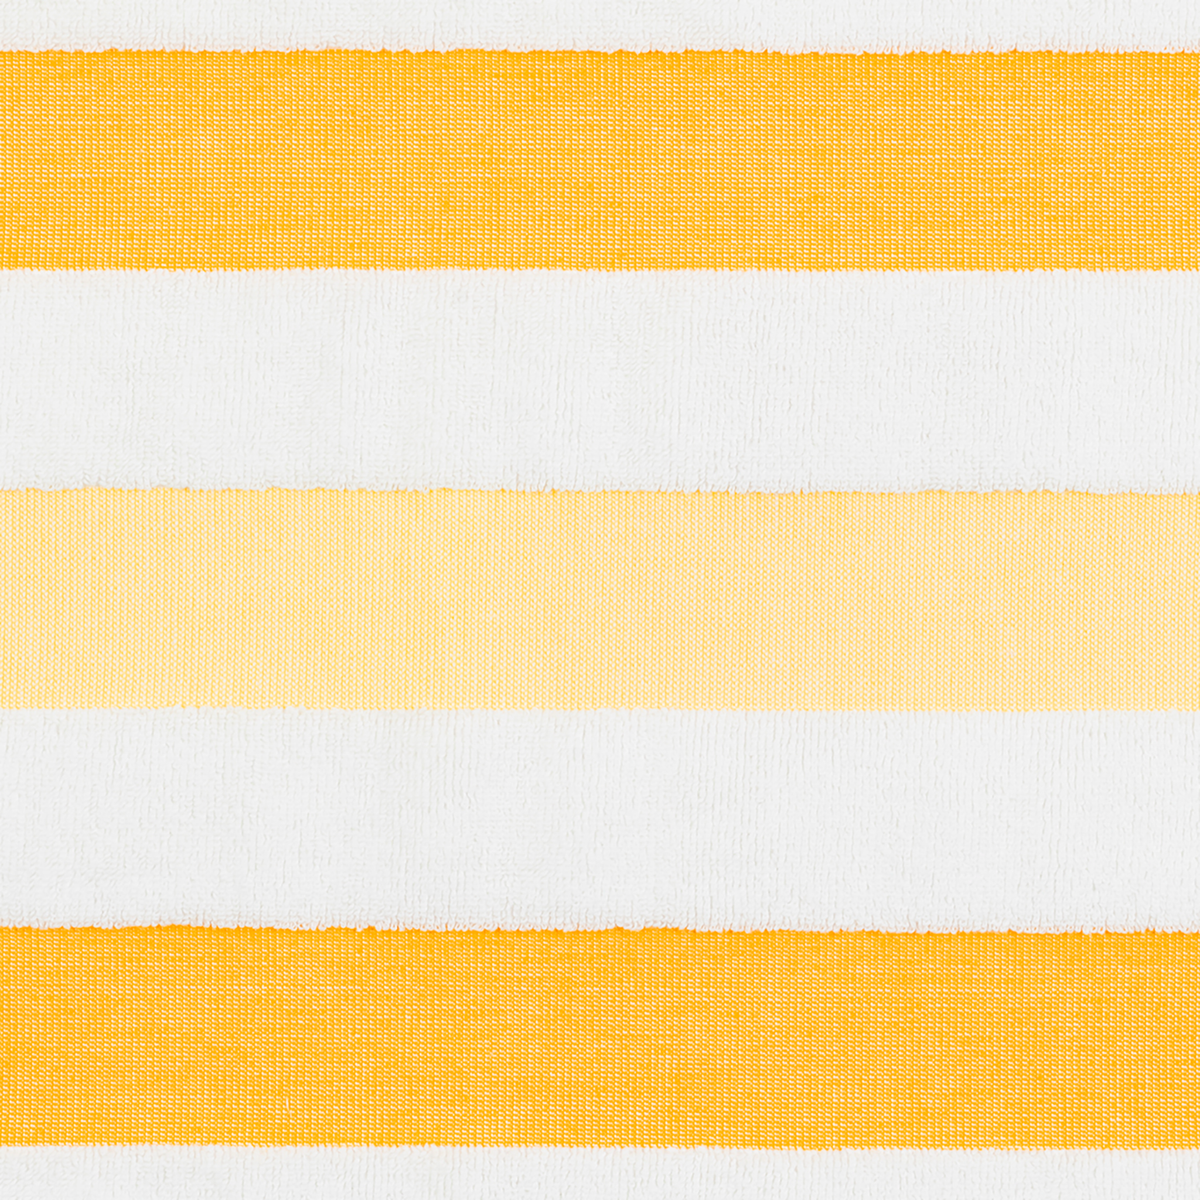 Swatch Sample of Matouk Amado Pool and Beach Towels in Canary Stripe Color